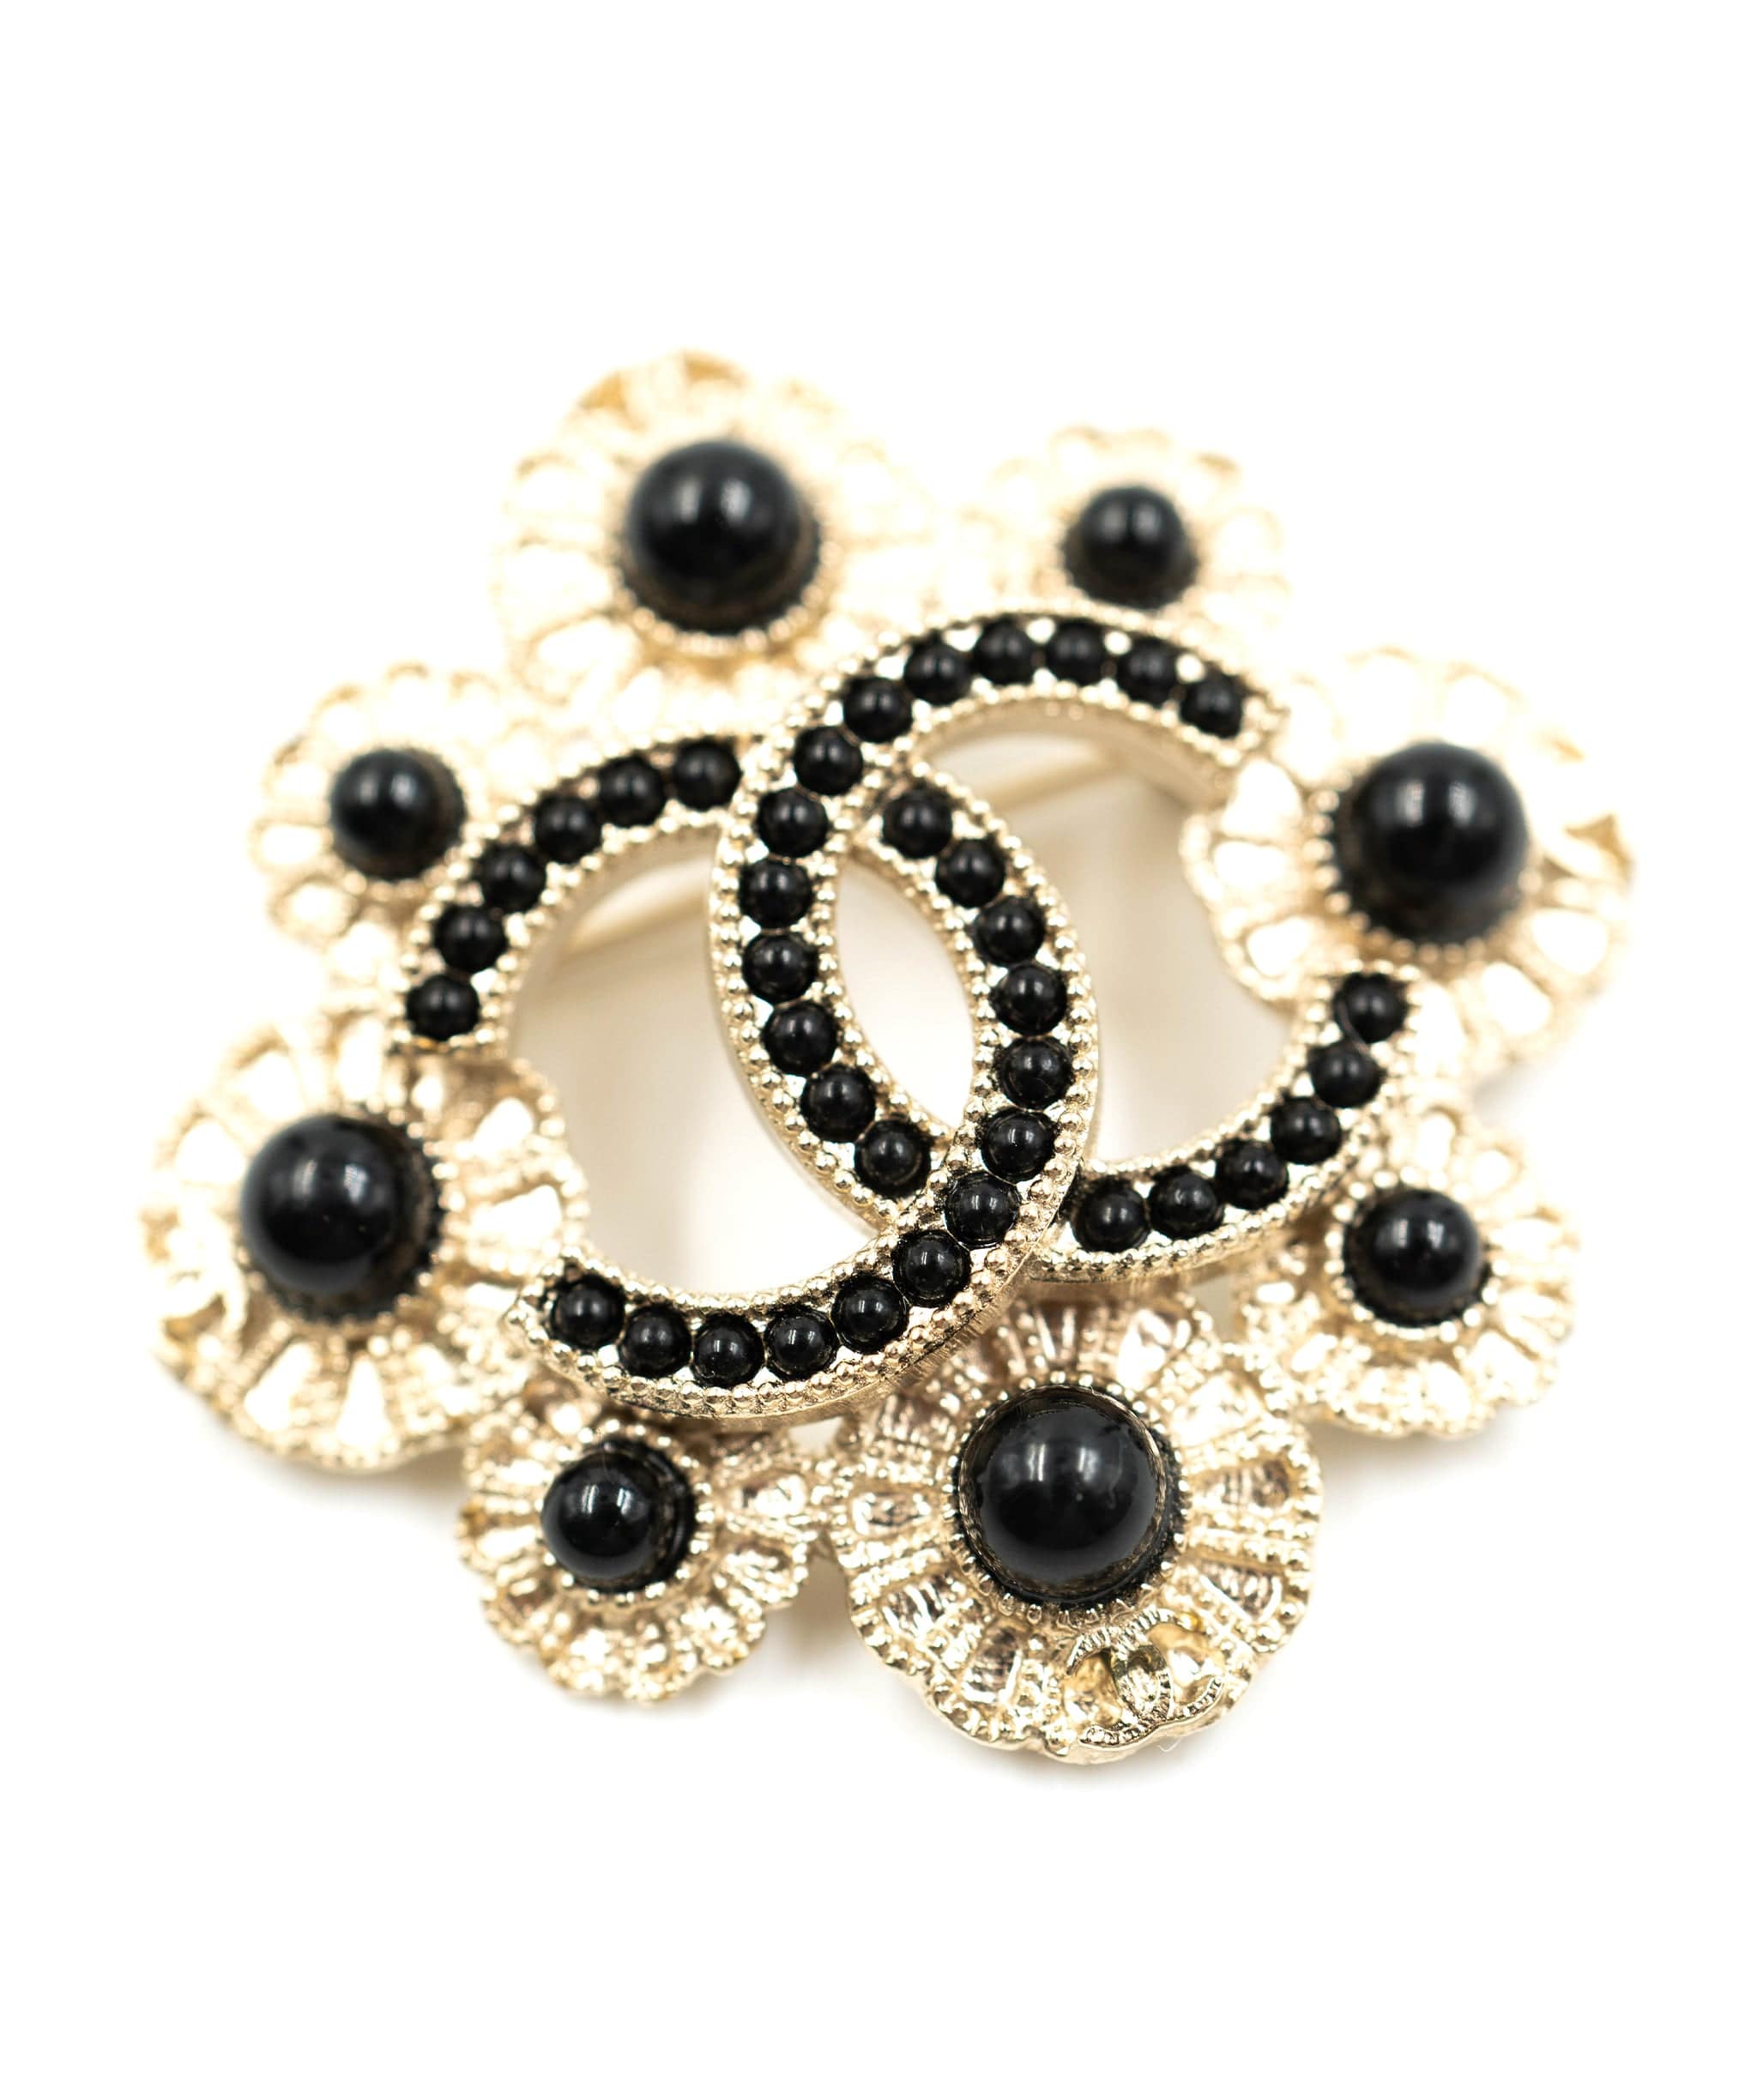 Chanel Chanel CC brooch with black stones - AWL3814